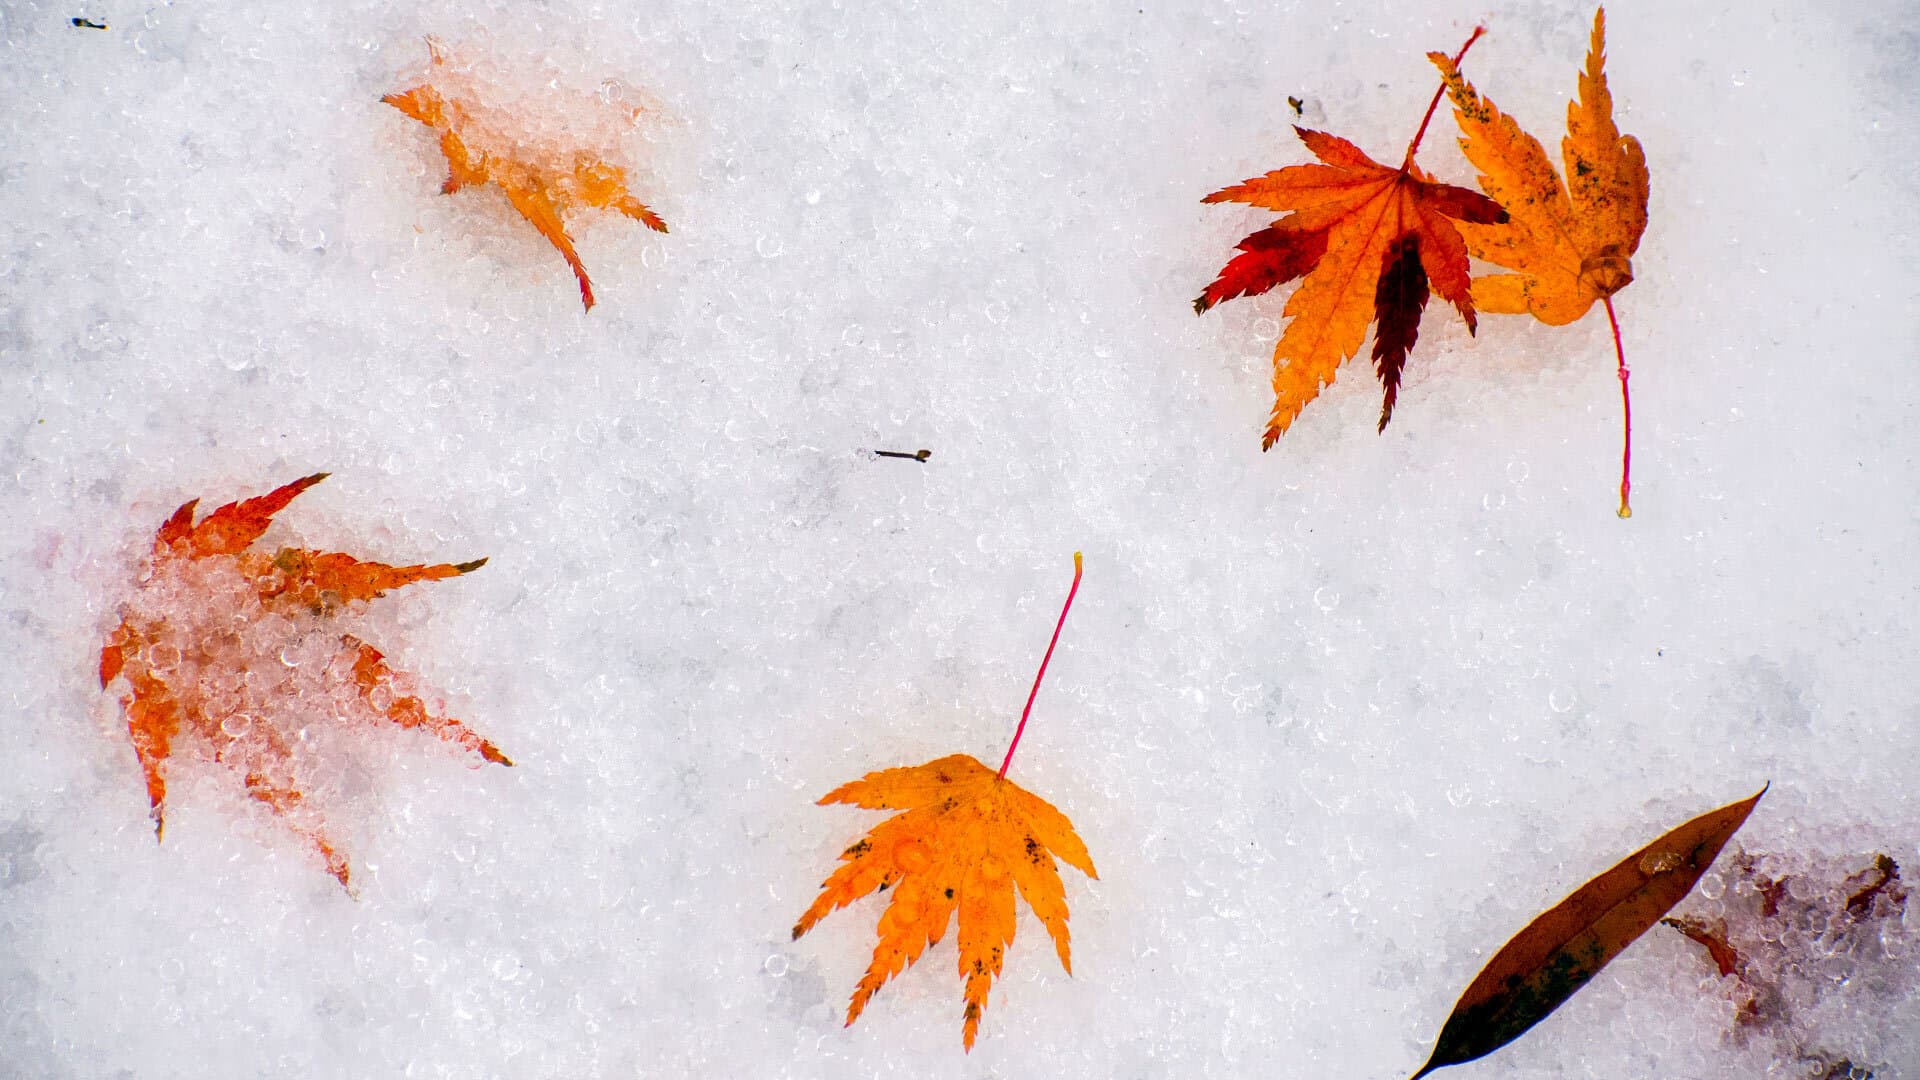 Fall Snow Day LC 11152018 0129 1920x1080